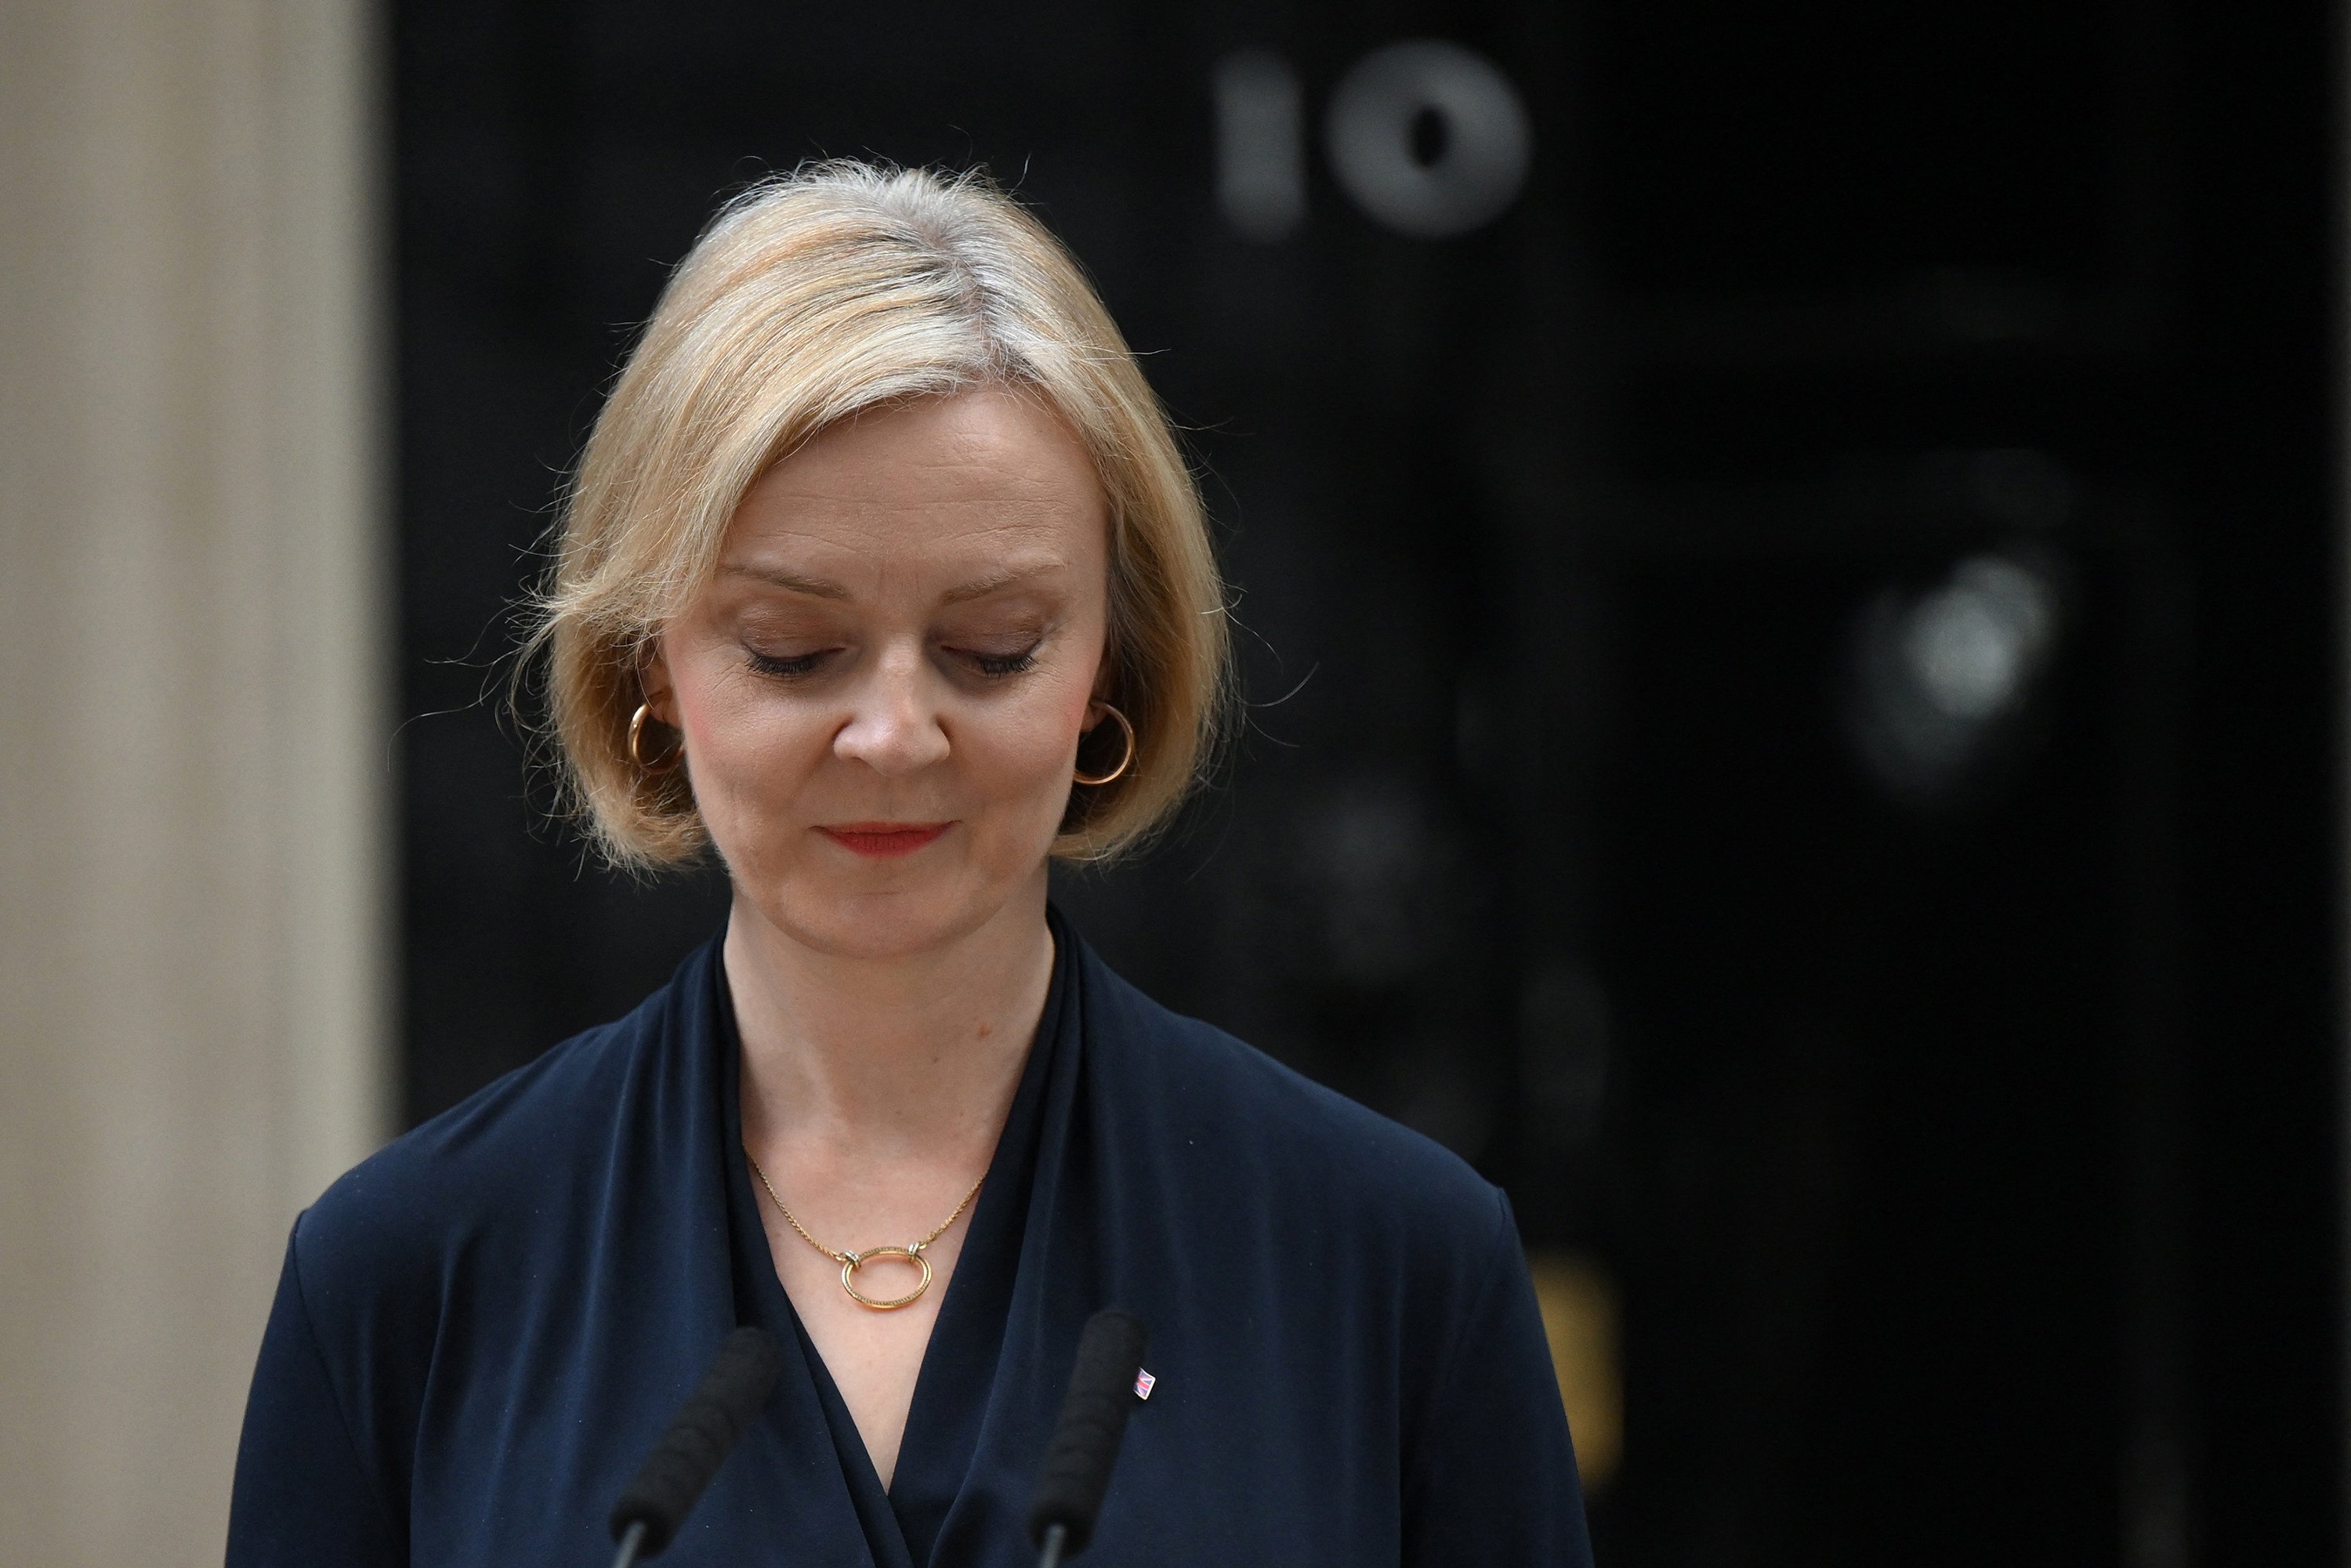 Britain’s former prime minister Liz Truss announces her resignation in London on October 20. Photo: AFP / Getty Images / TNS